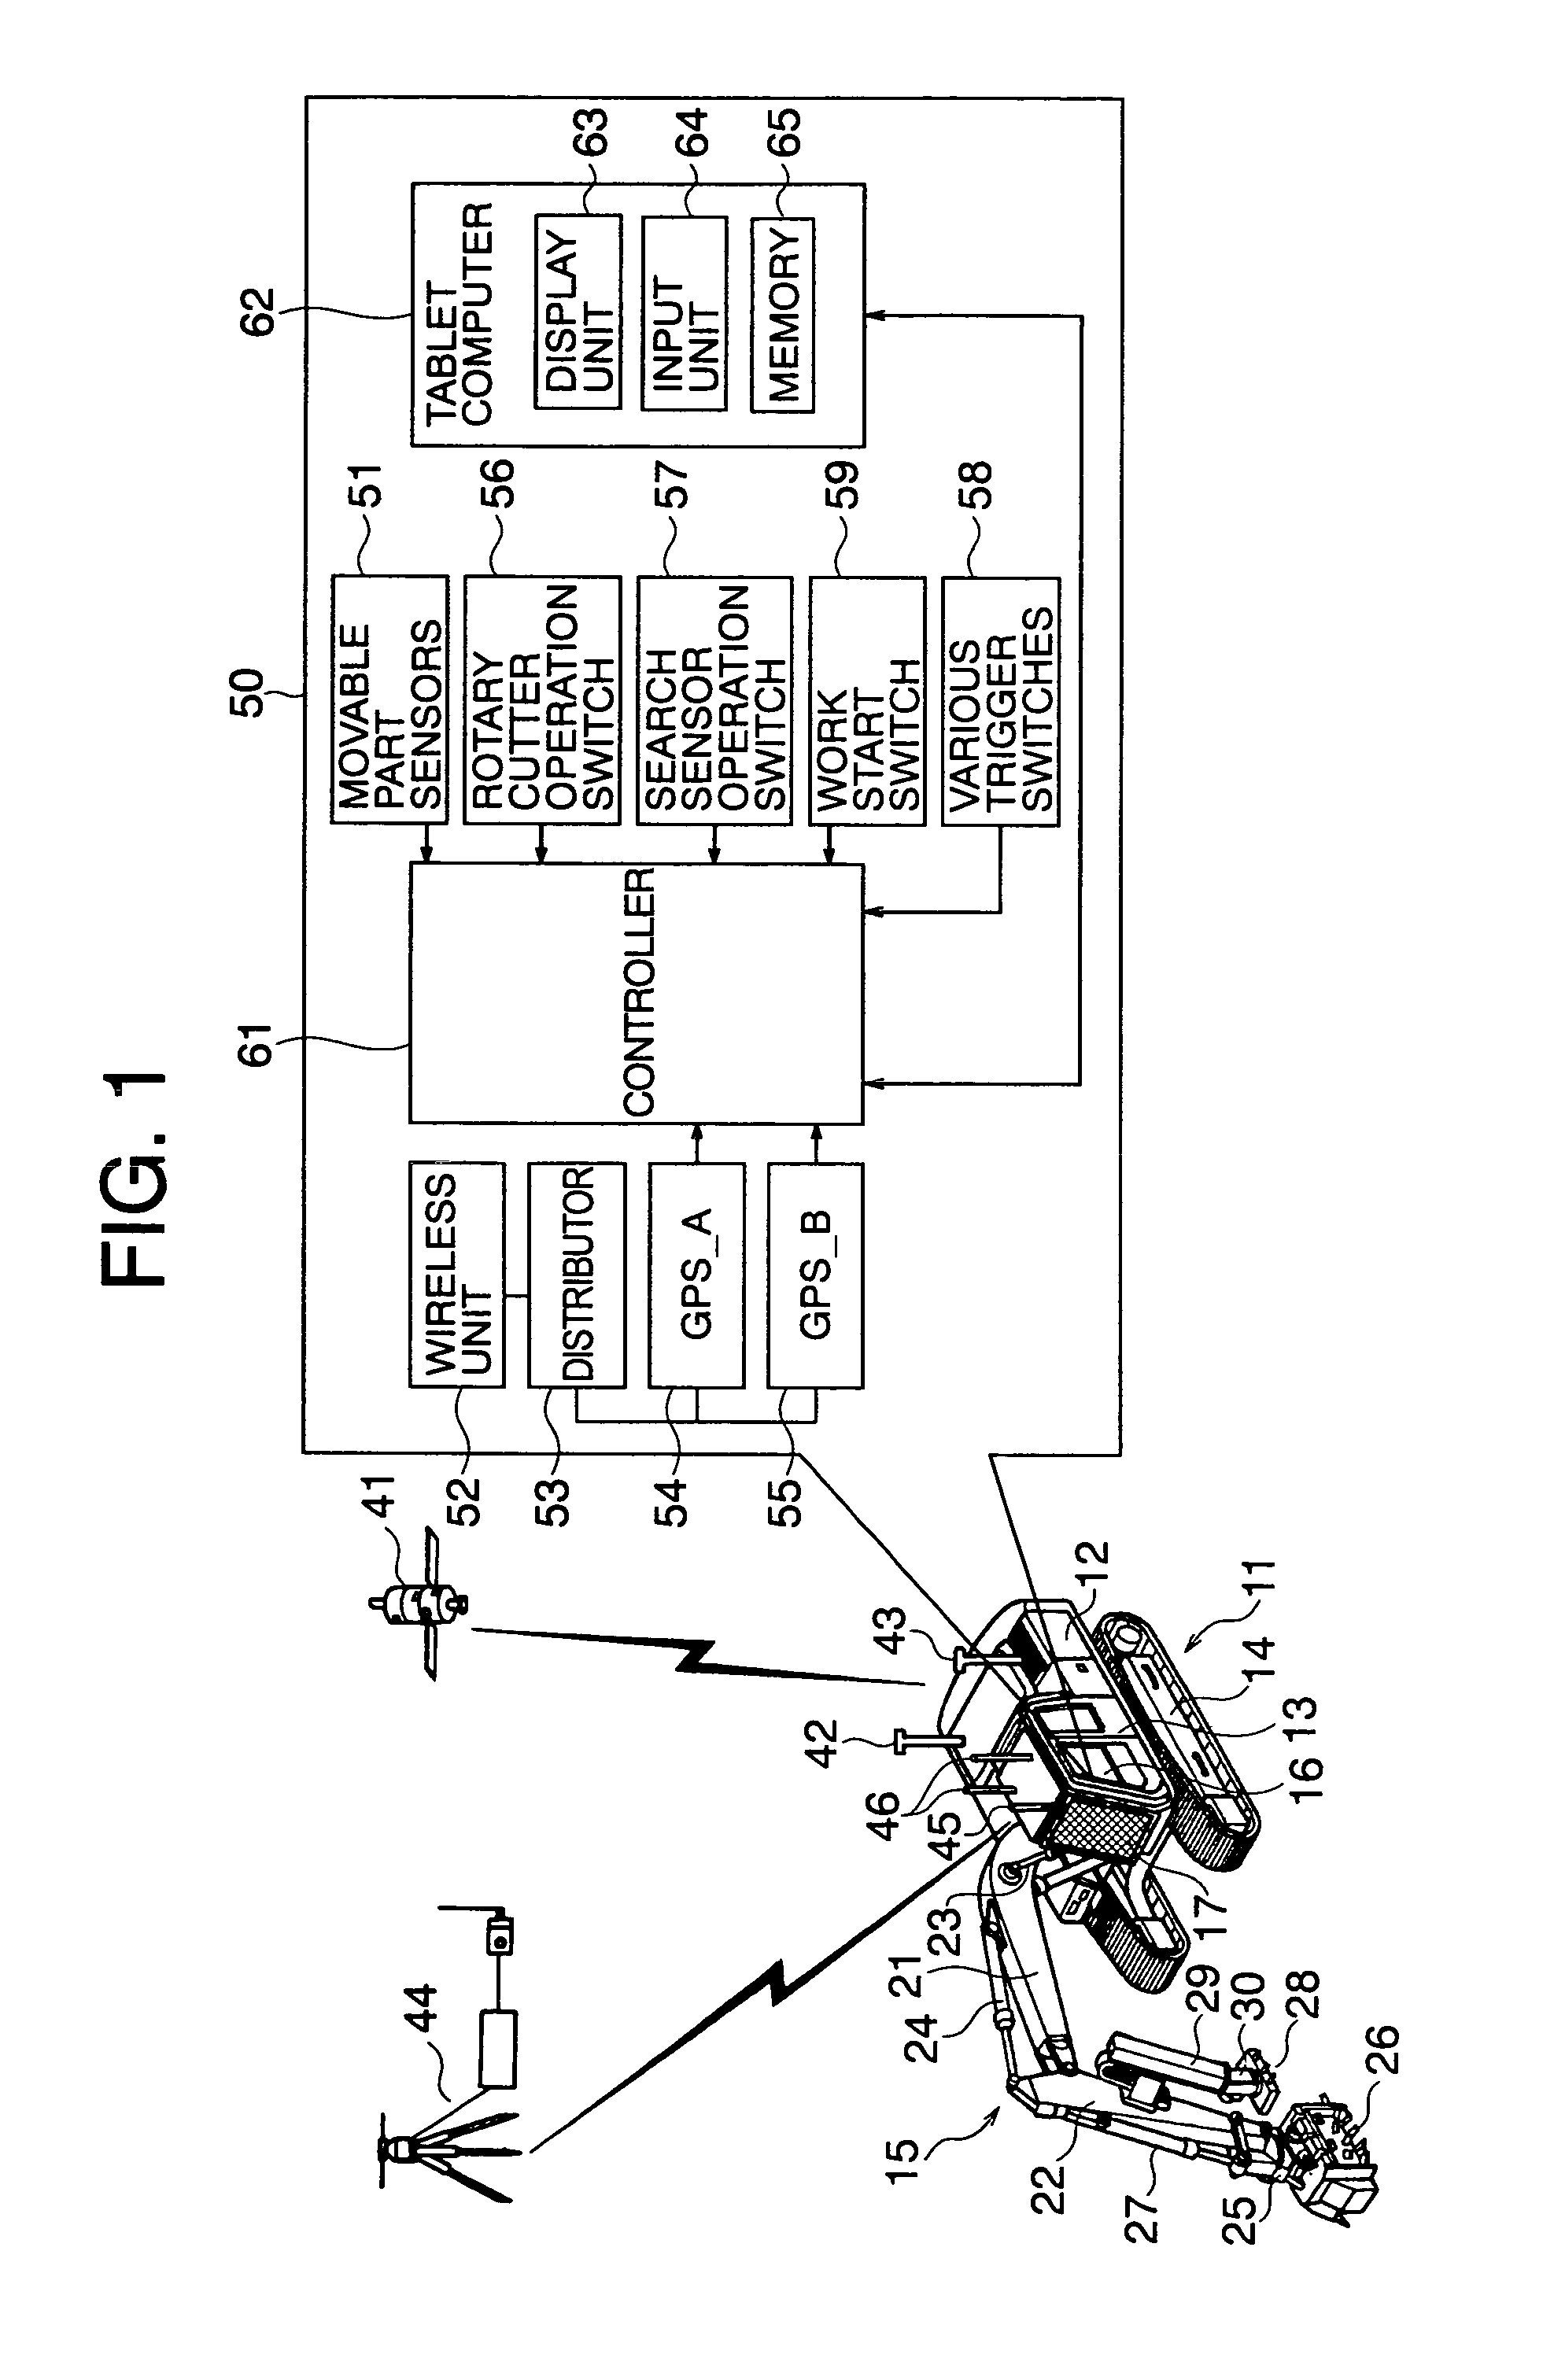 Work area setting and managing system